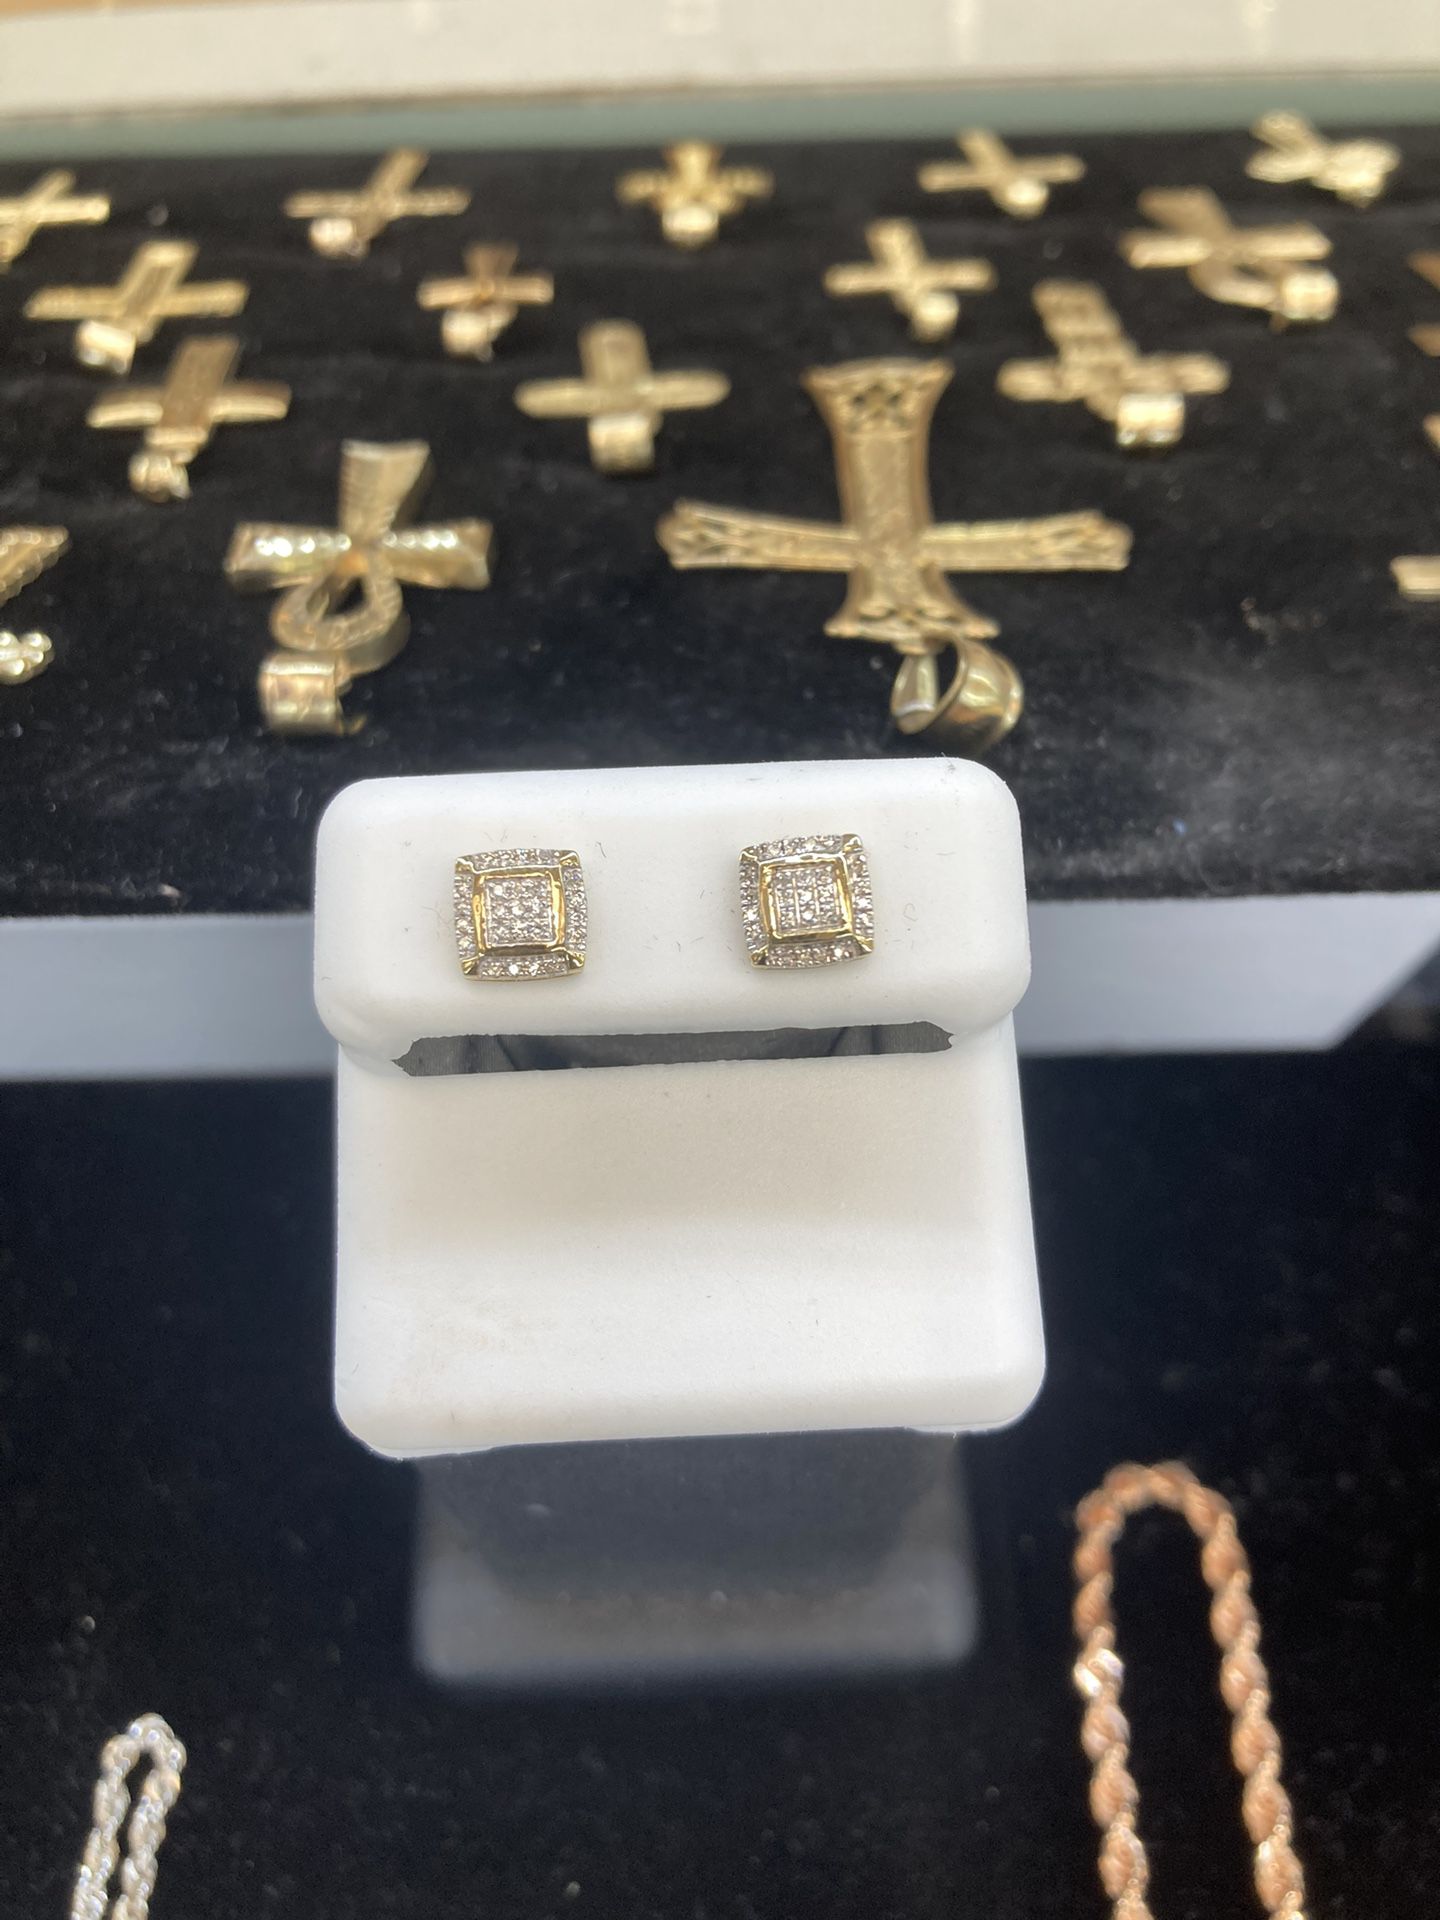 Diamond Earing 10kt yellow gold special price 